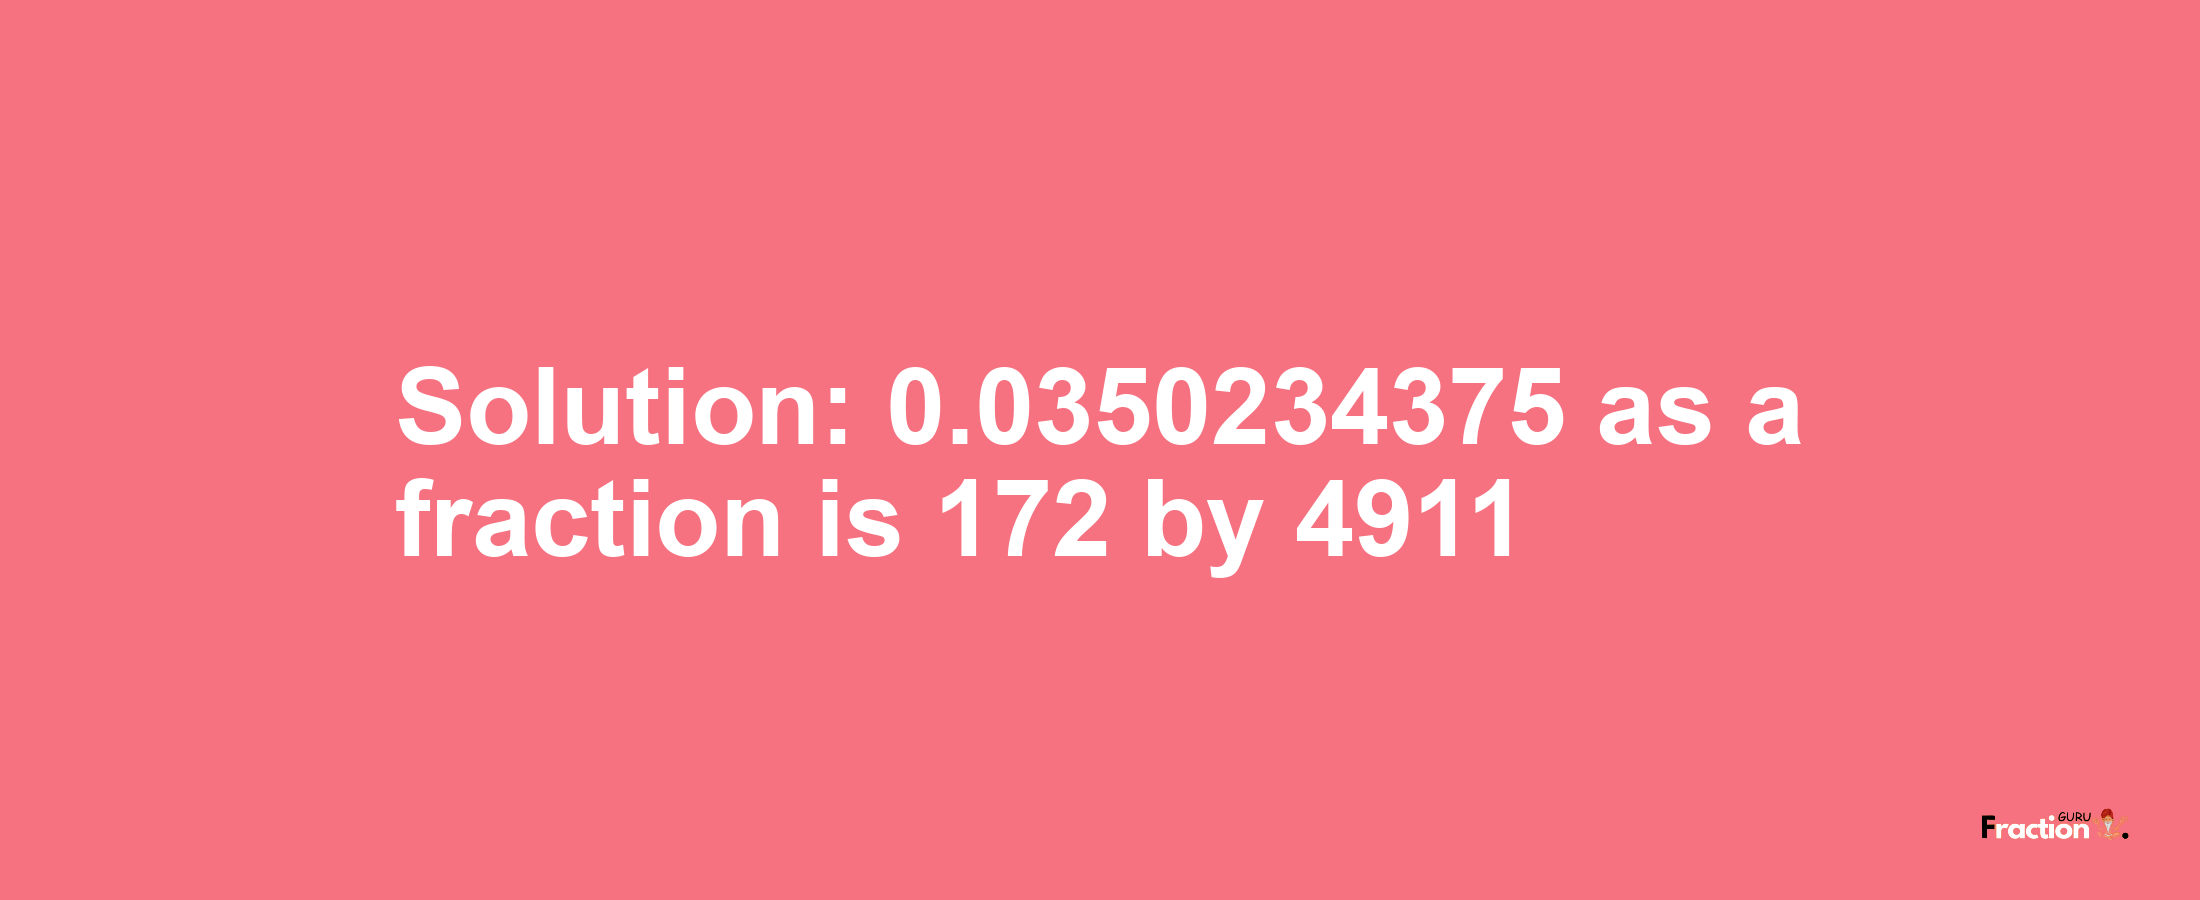 Solution:0.0350234375 as a fraction is 172/4911